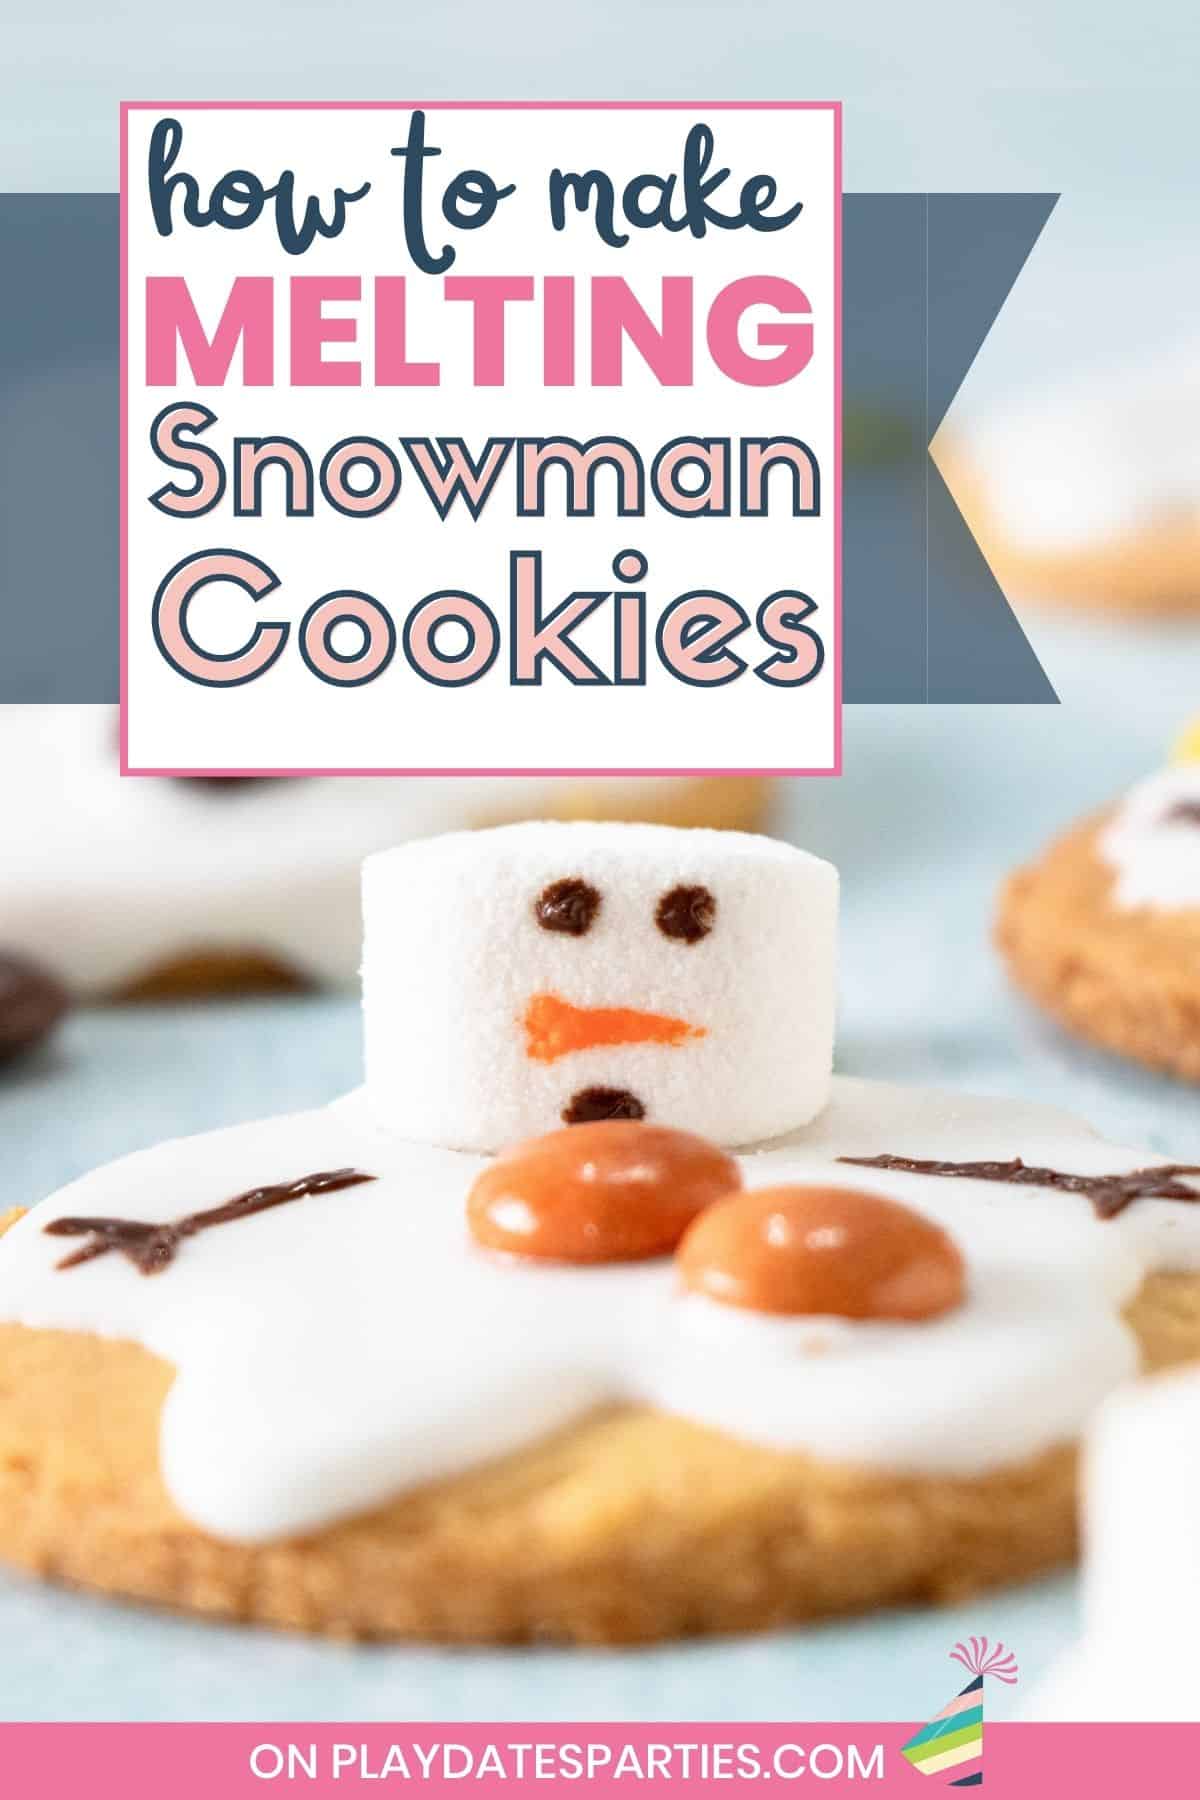 Close up front view of a decorated cookie with text overlay how to make melting snowman cookies.